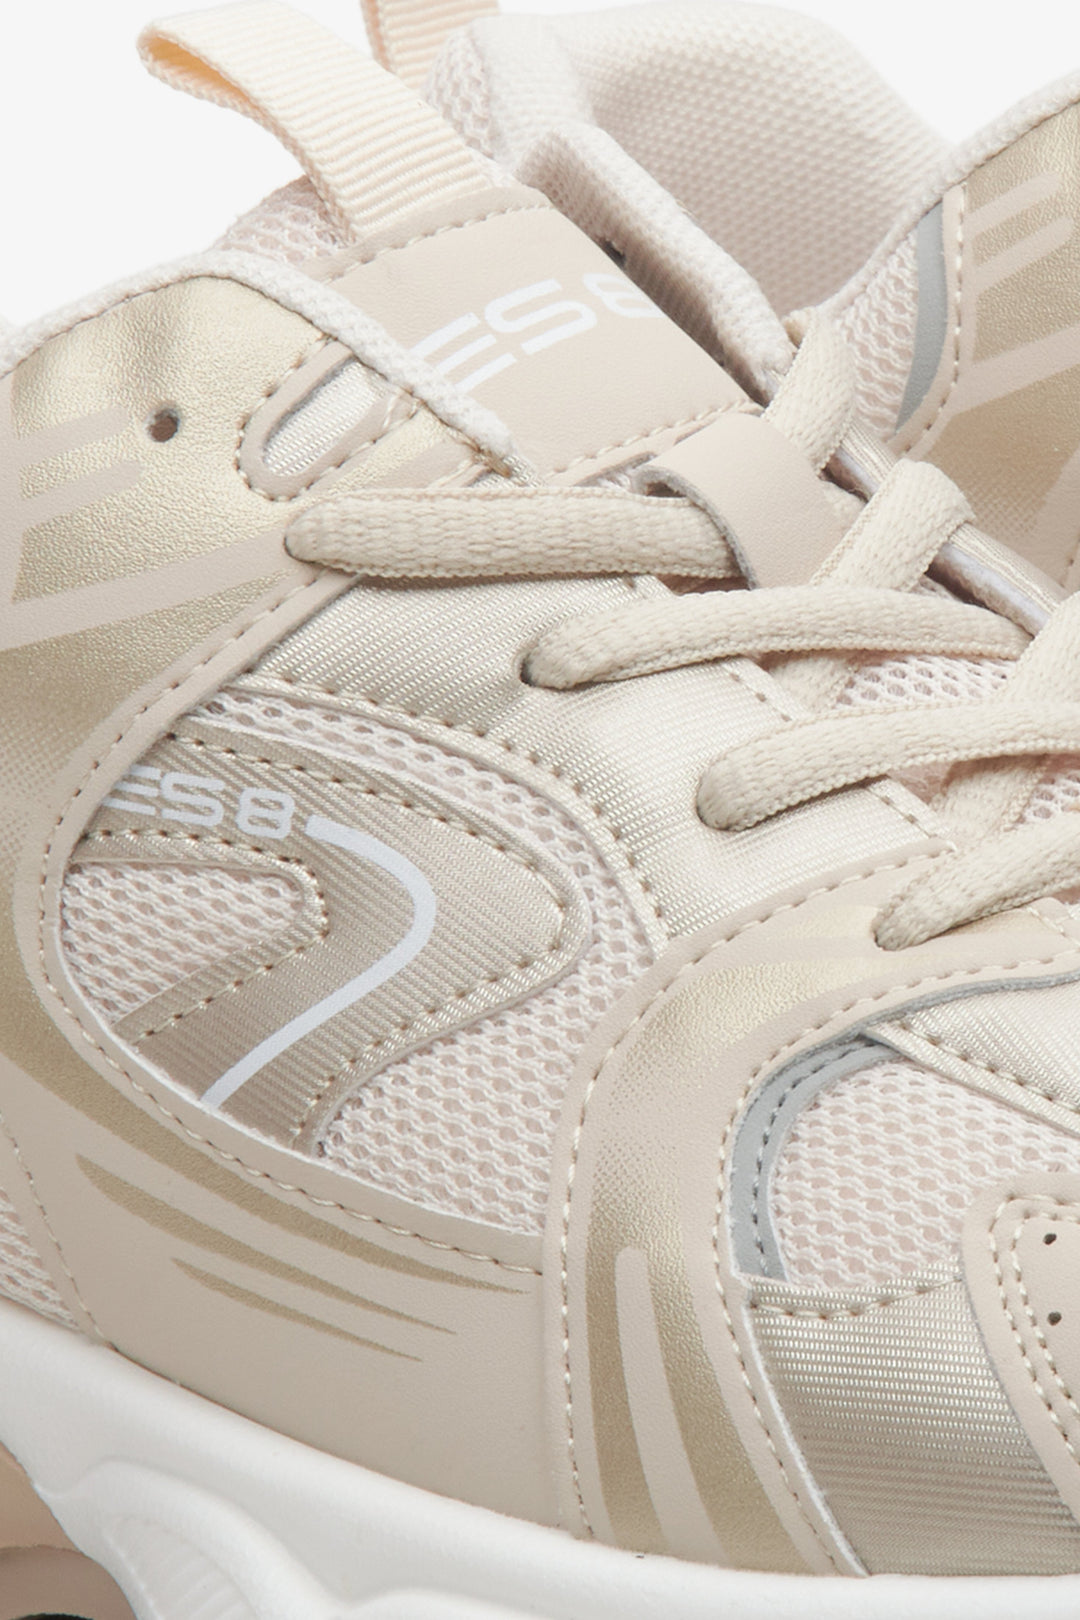 Women's beige and white  sneakers with golden details ES 8 - close-up on the seam line.